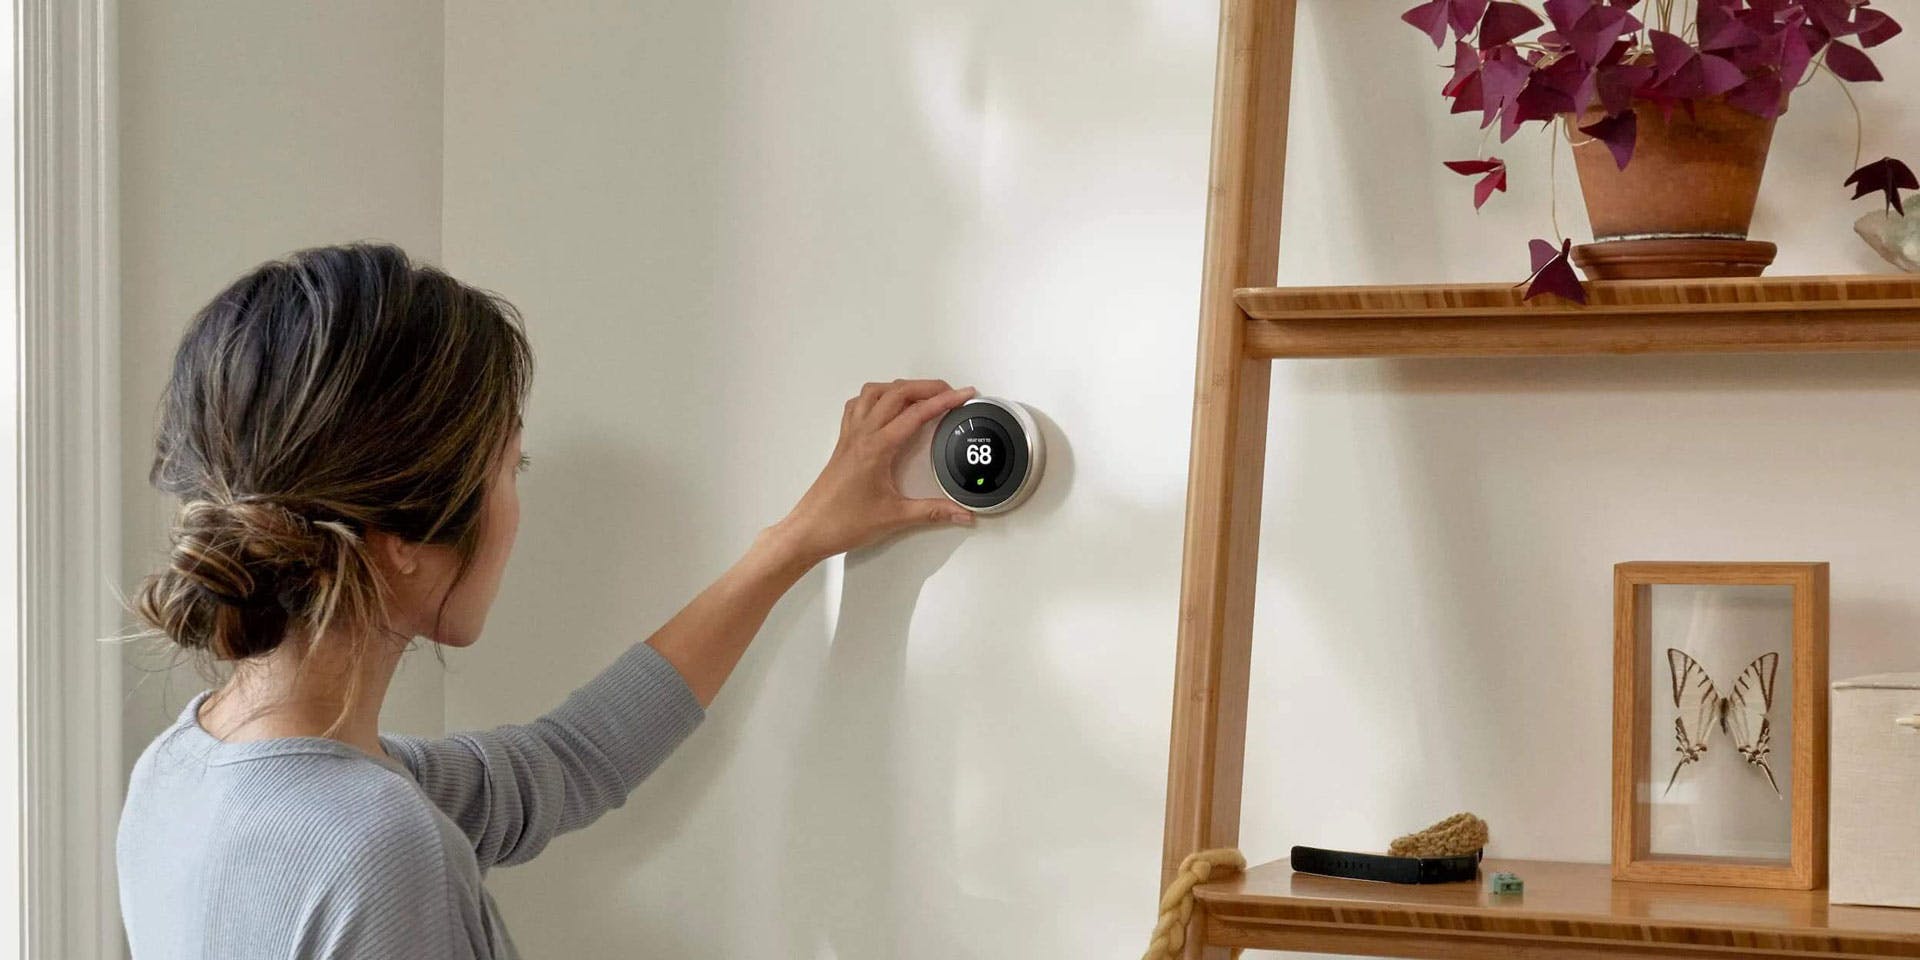 Woman reaching out to the wall to change the temperature on her Smart Thermostat